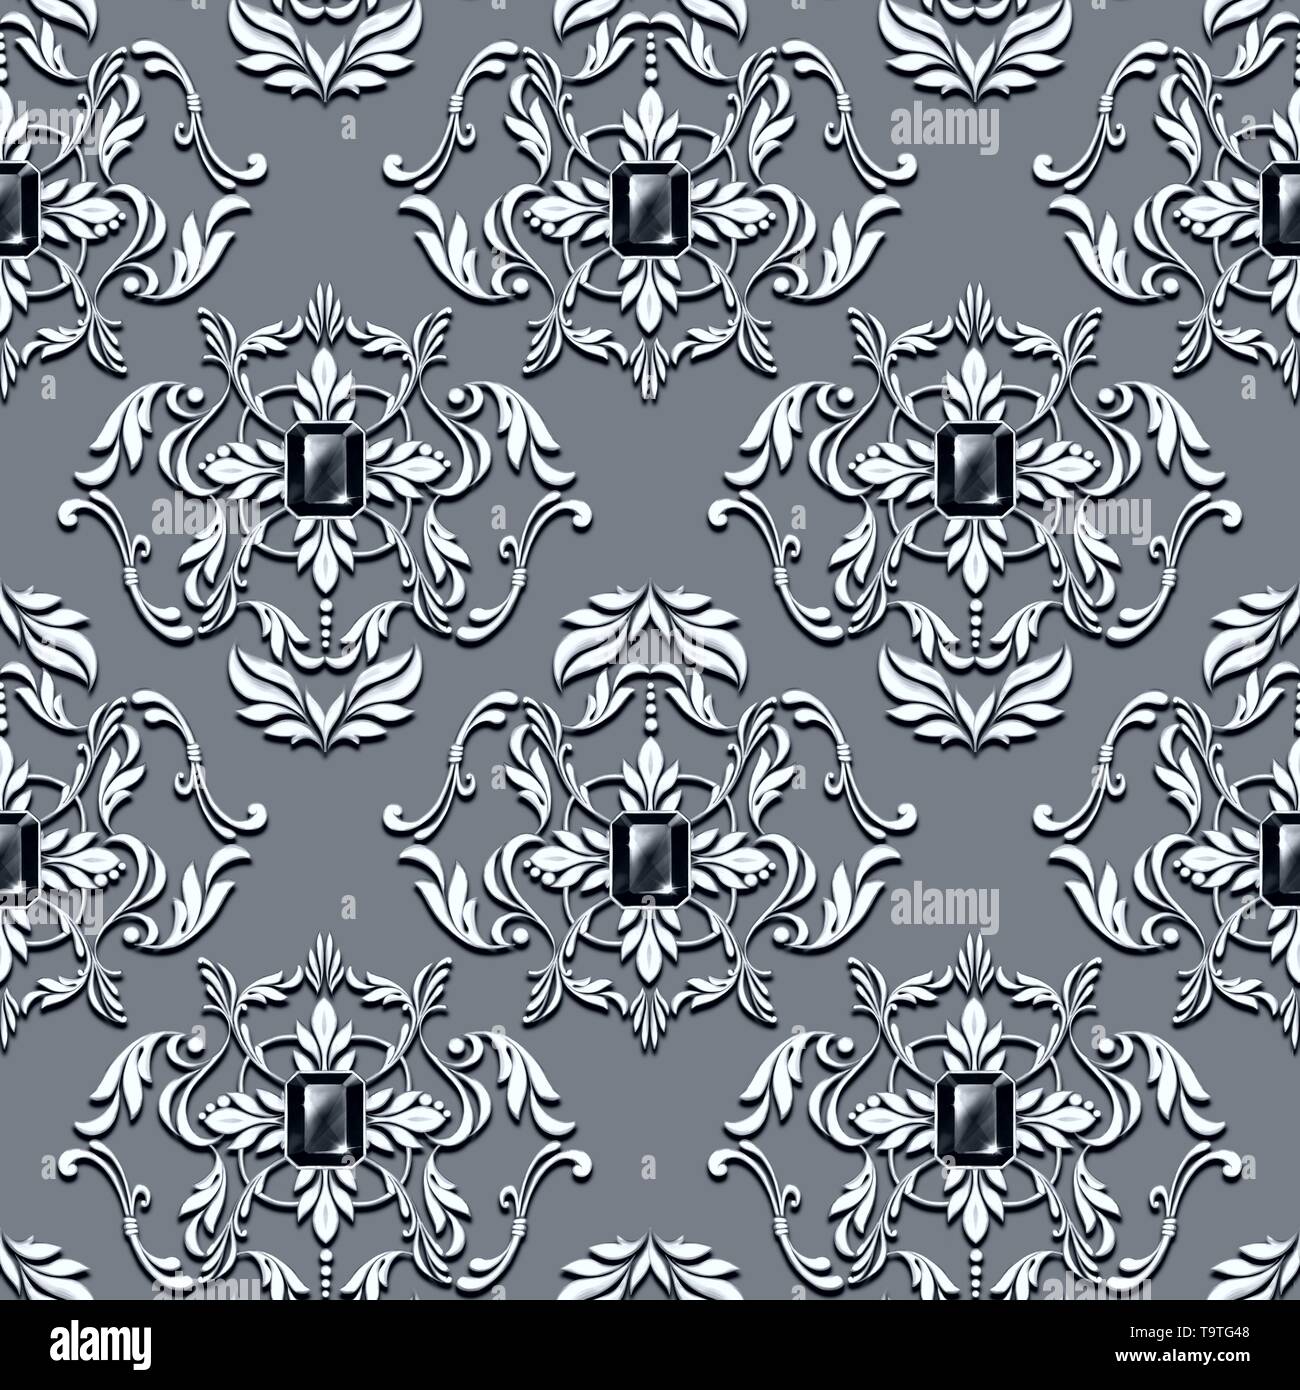 Black and white seamless baroque pattern Stock Photo